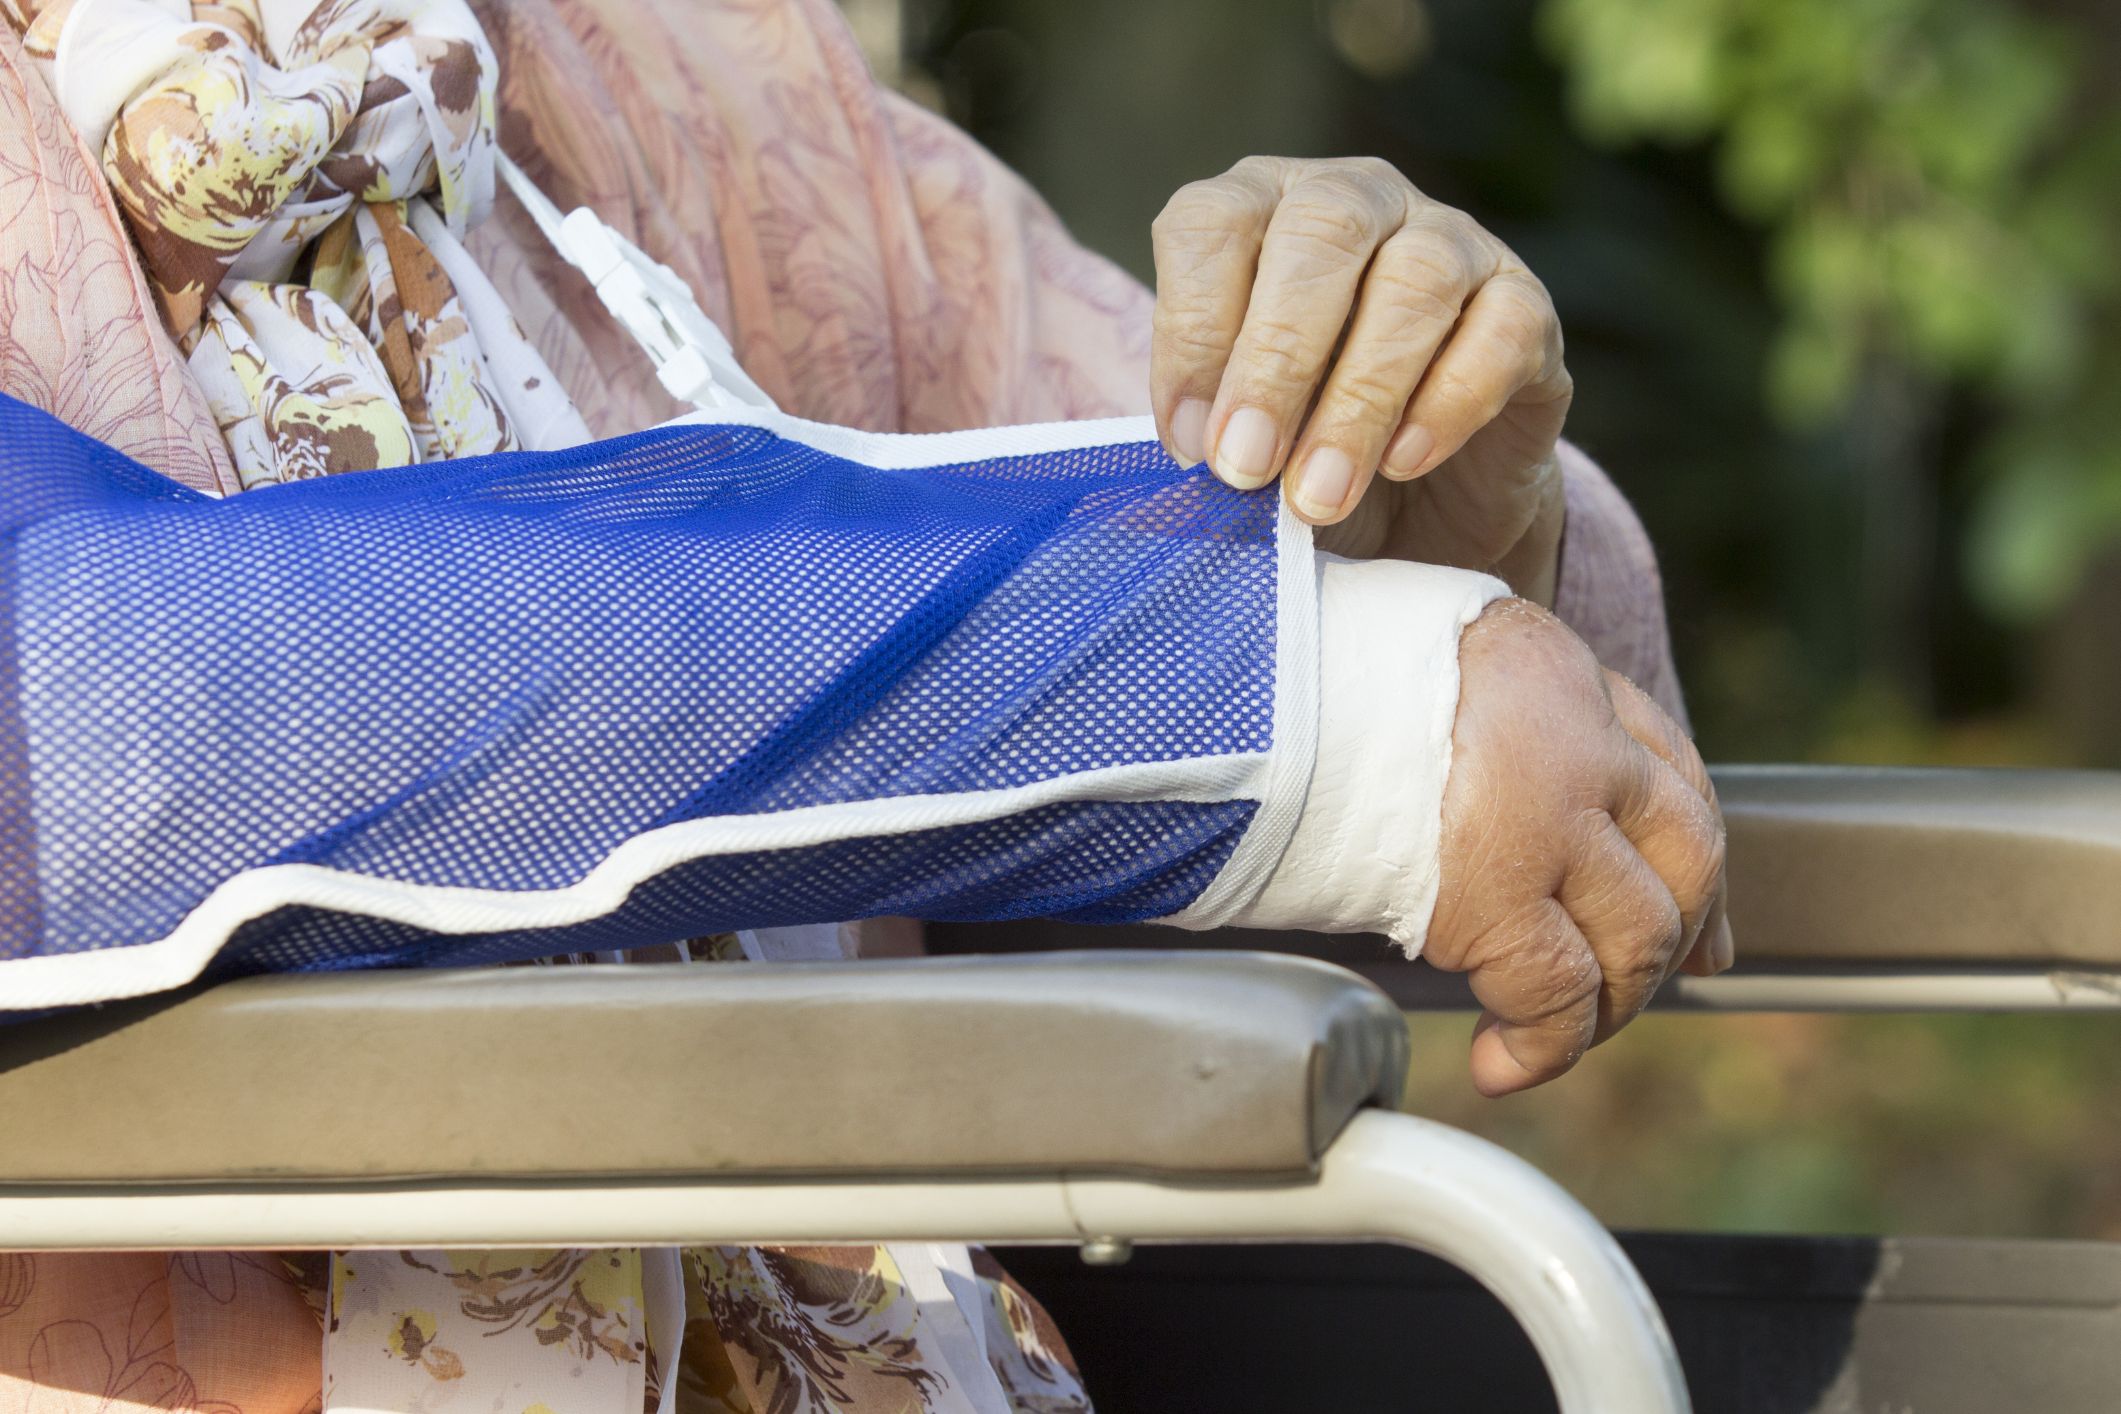 Seniors receiving home care hospitalised twice as much as aged care residents